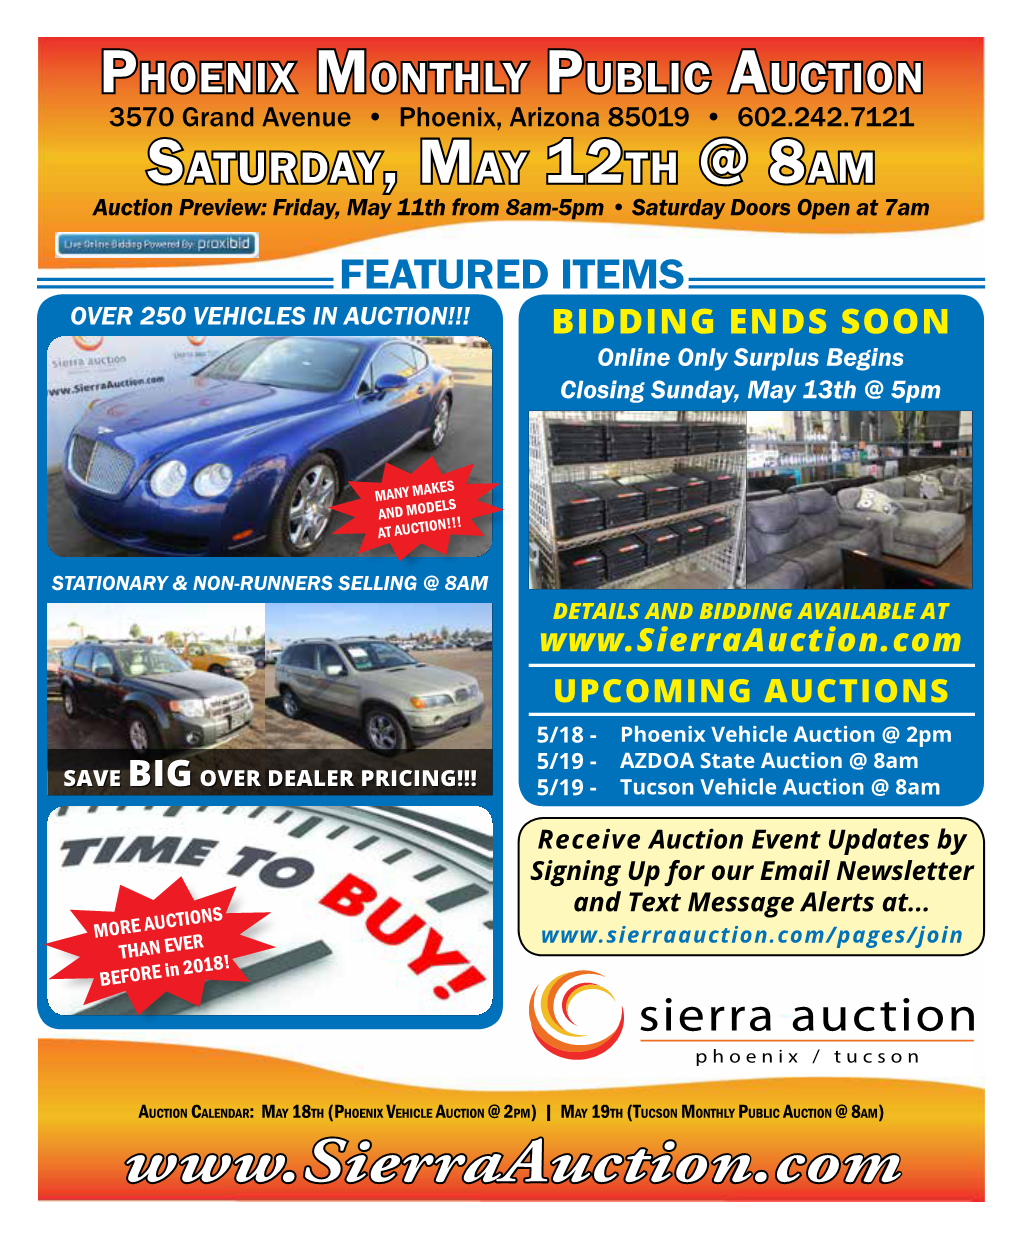 UPCOMING AUCTIONS 5/18 - Phoenix Vehicle Auction @ 2Pm 5/19 - AZDOA State Auction @ 8Am SAVE BIG OVER DEALER PRICING!!! 5/19 - Tucson Vehicle Auction @ 8Am